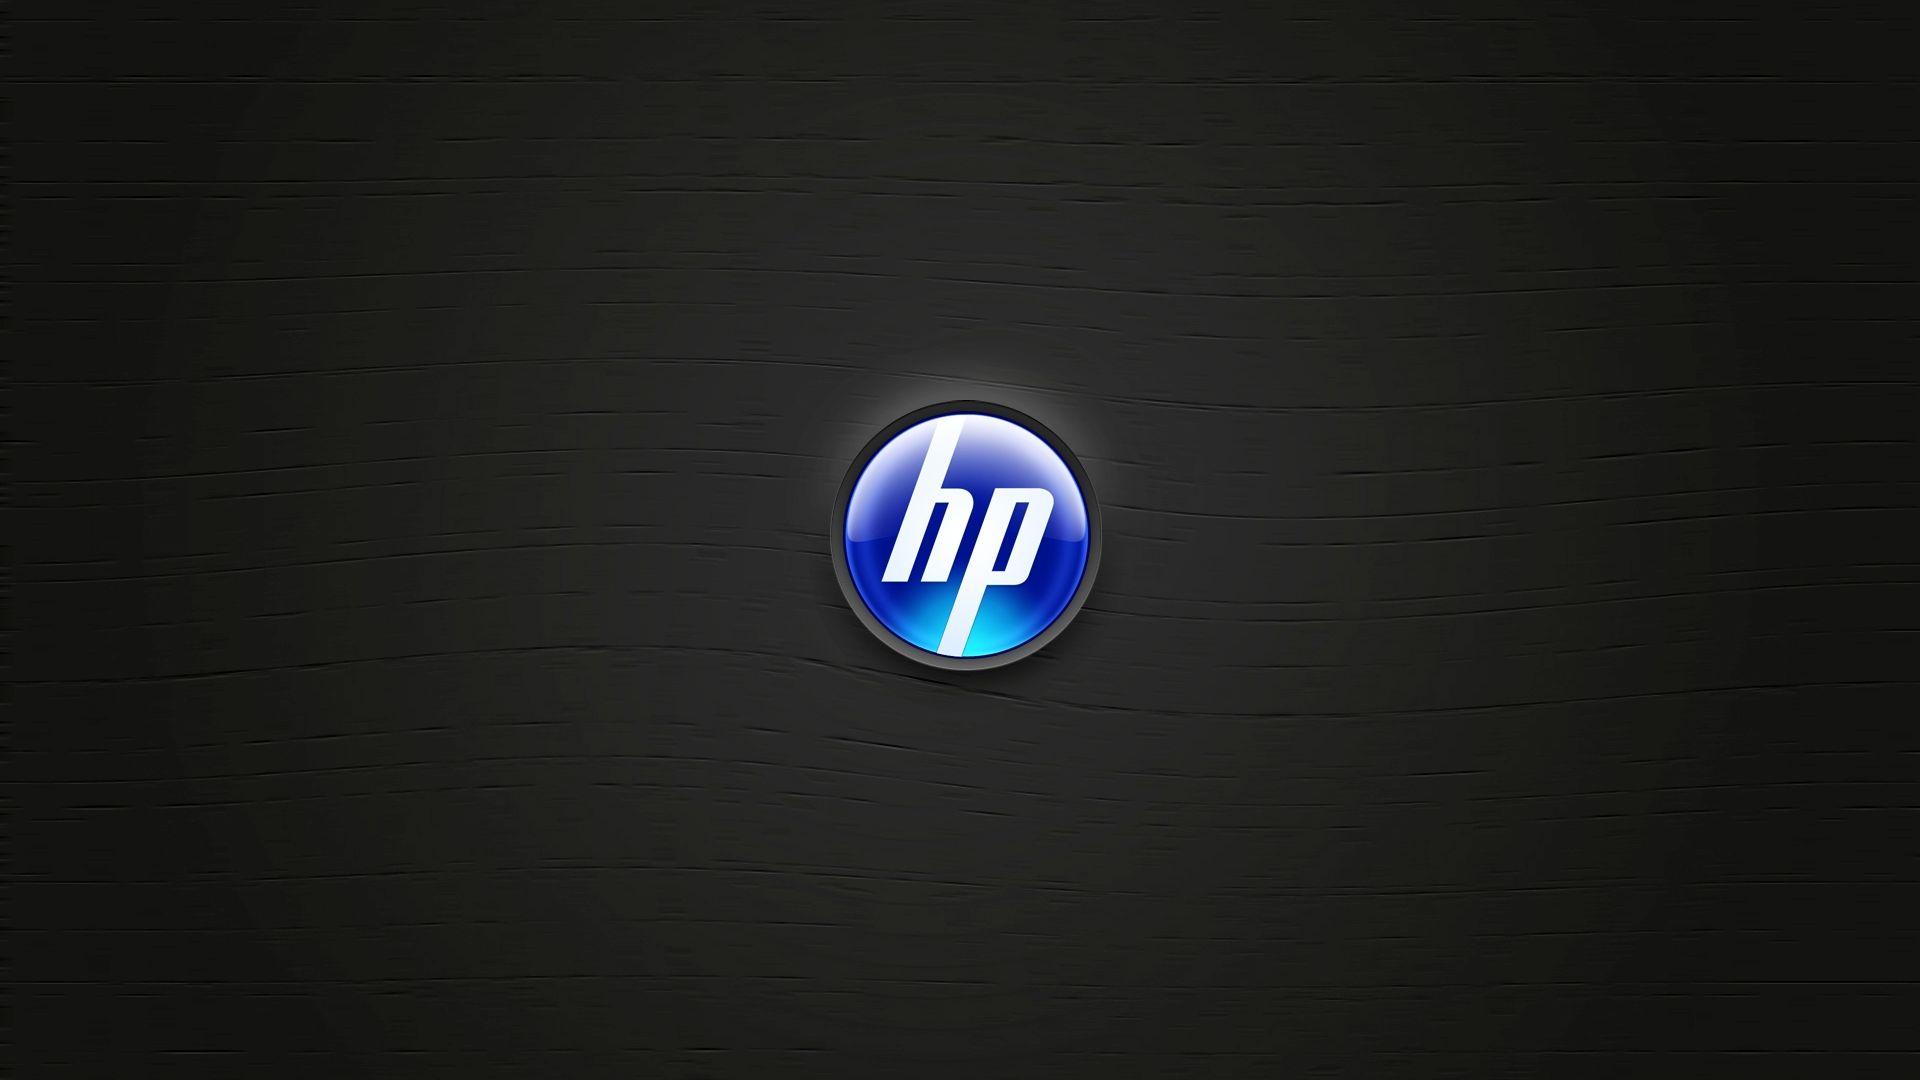 Epic Hp Hd Wallpaper For Windows 8 57 For Your Windows Computers With Hp Hd Wallpaper For Windows